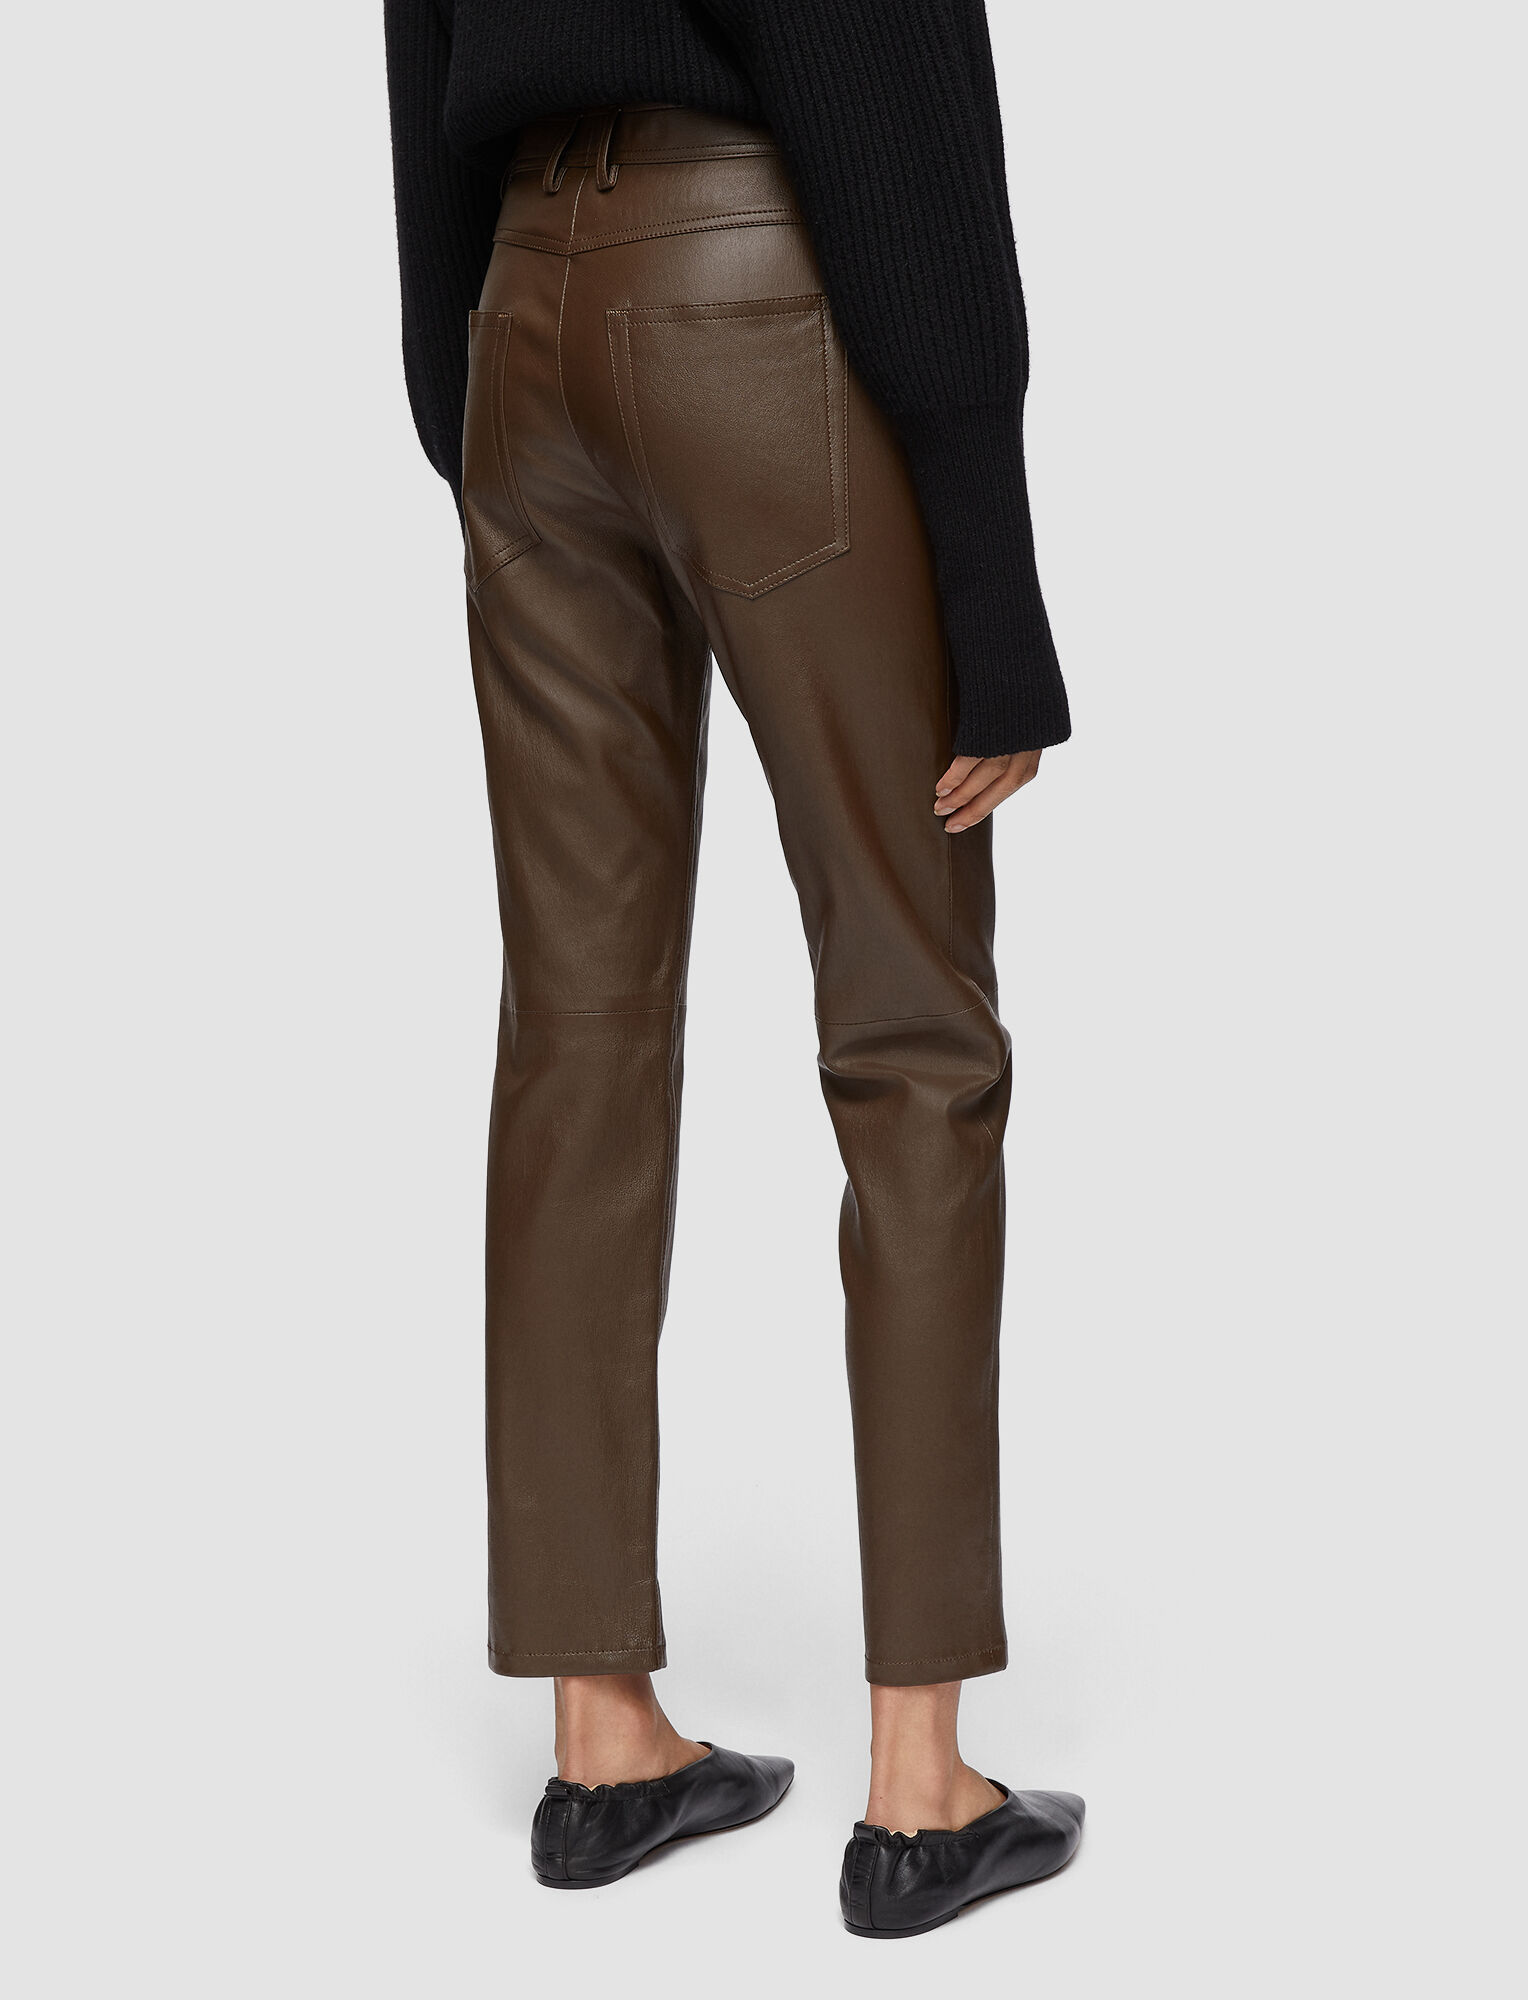 Joseph, Leather Stretch Teddy Trousers, in PINECONE